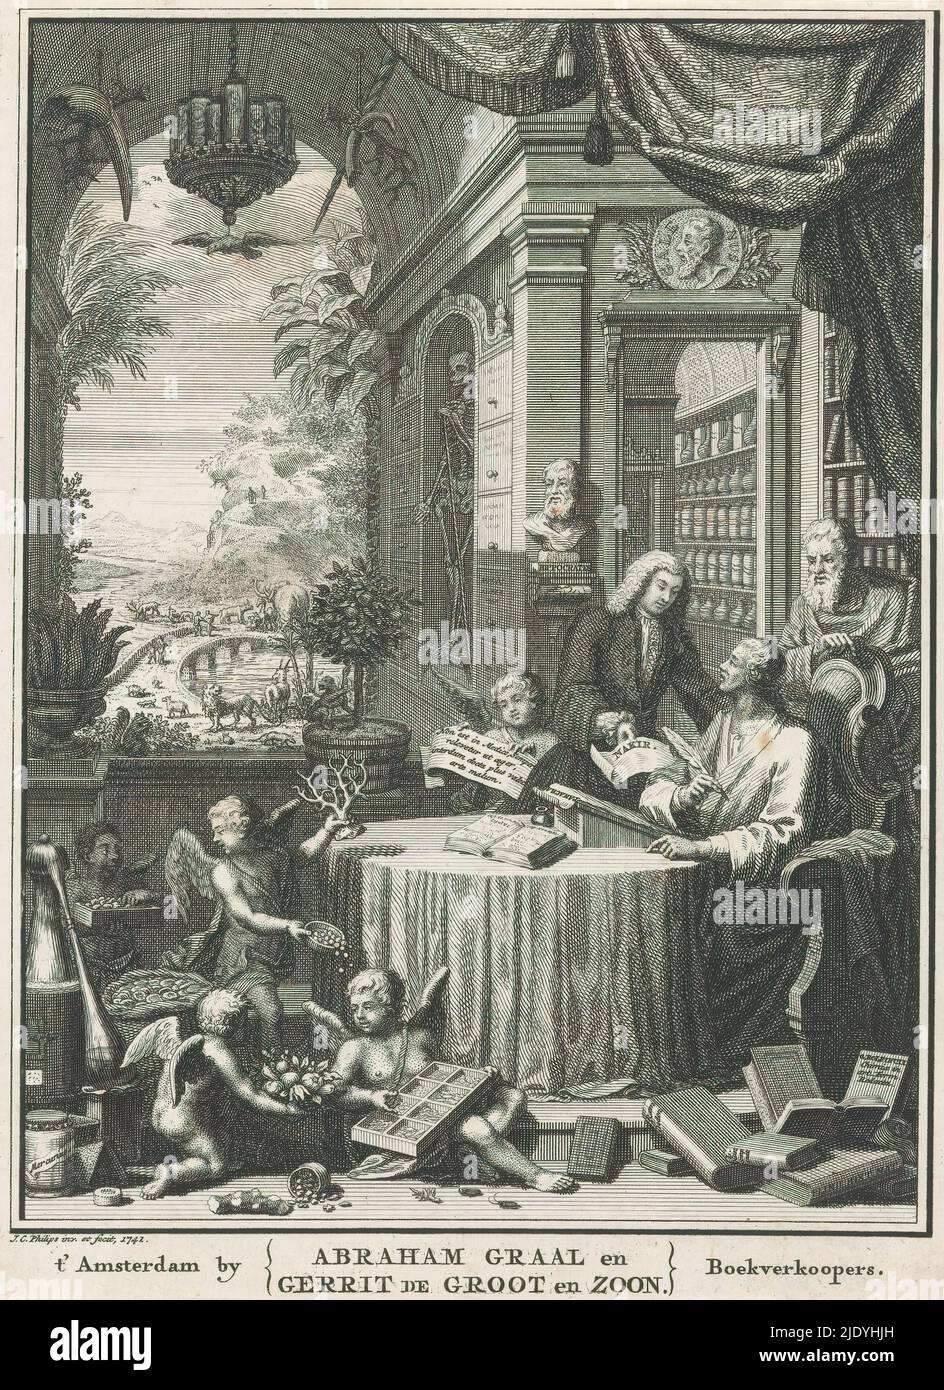 Allegorical representation with doctor, apothecary and Asclepius in pharmacy, Title page for: Johan Jacob Woyt, Gazophylacium medico-physicum, or treasury of medicine and natural science, 1766 (title on object), A scholar or doctor sits writing behind a table. An apothecary to his right hands him a paper. Behind him stands Asclepius with an esculope. In front of the table, putti sit and stand near a distillation apparatus with plants used for healing. In the background a pharmacy with jars, bottles, books, a skeleton, a bust of Hippocrates and a portrait medallion of Galenus. In the background Stock Photo